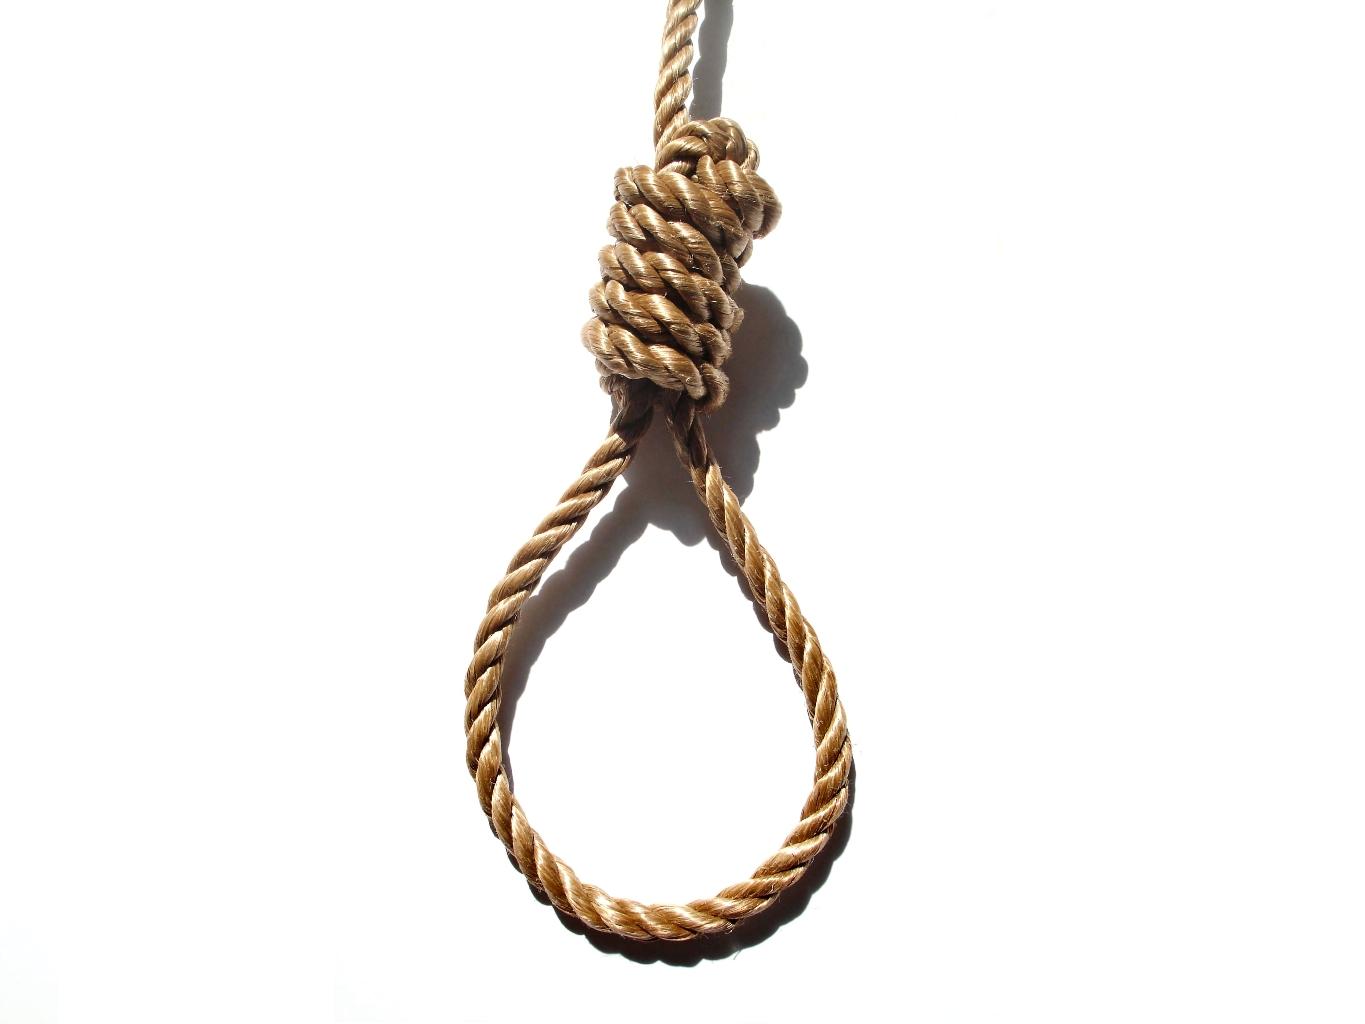 teenager 039 commits suicide 039 photo file